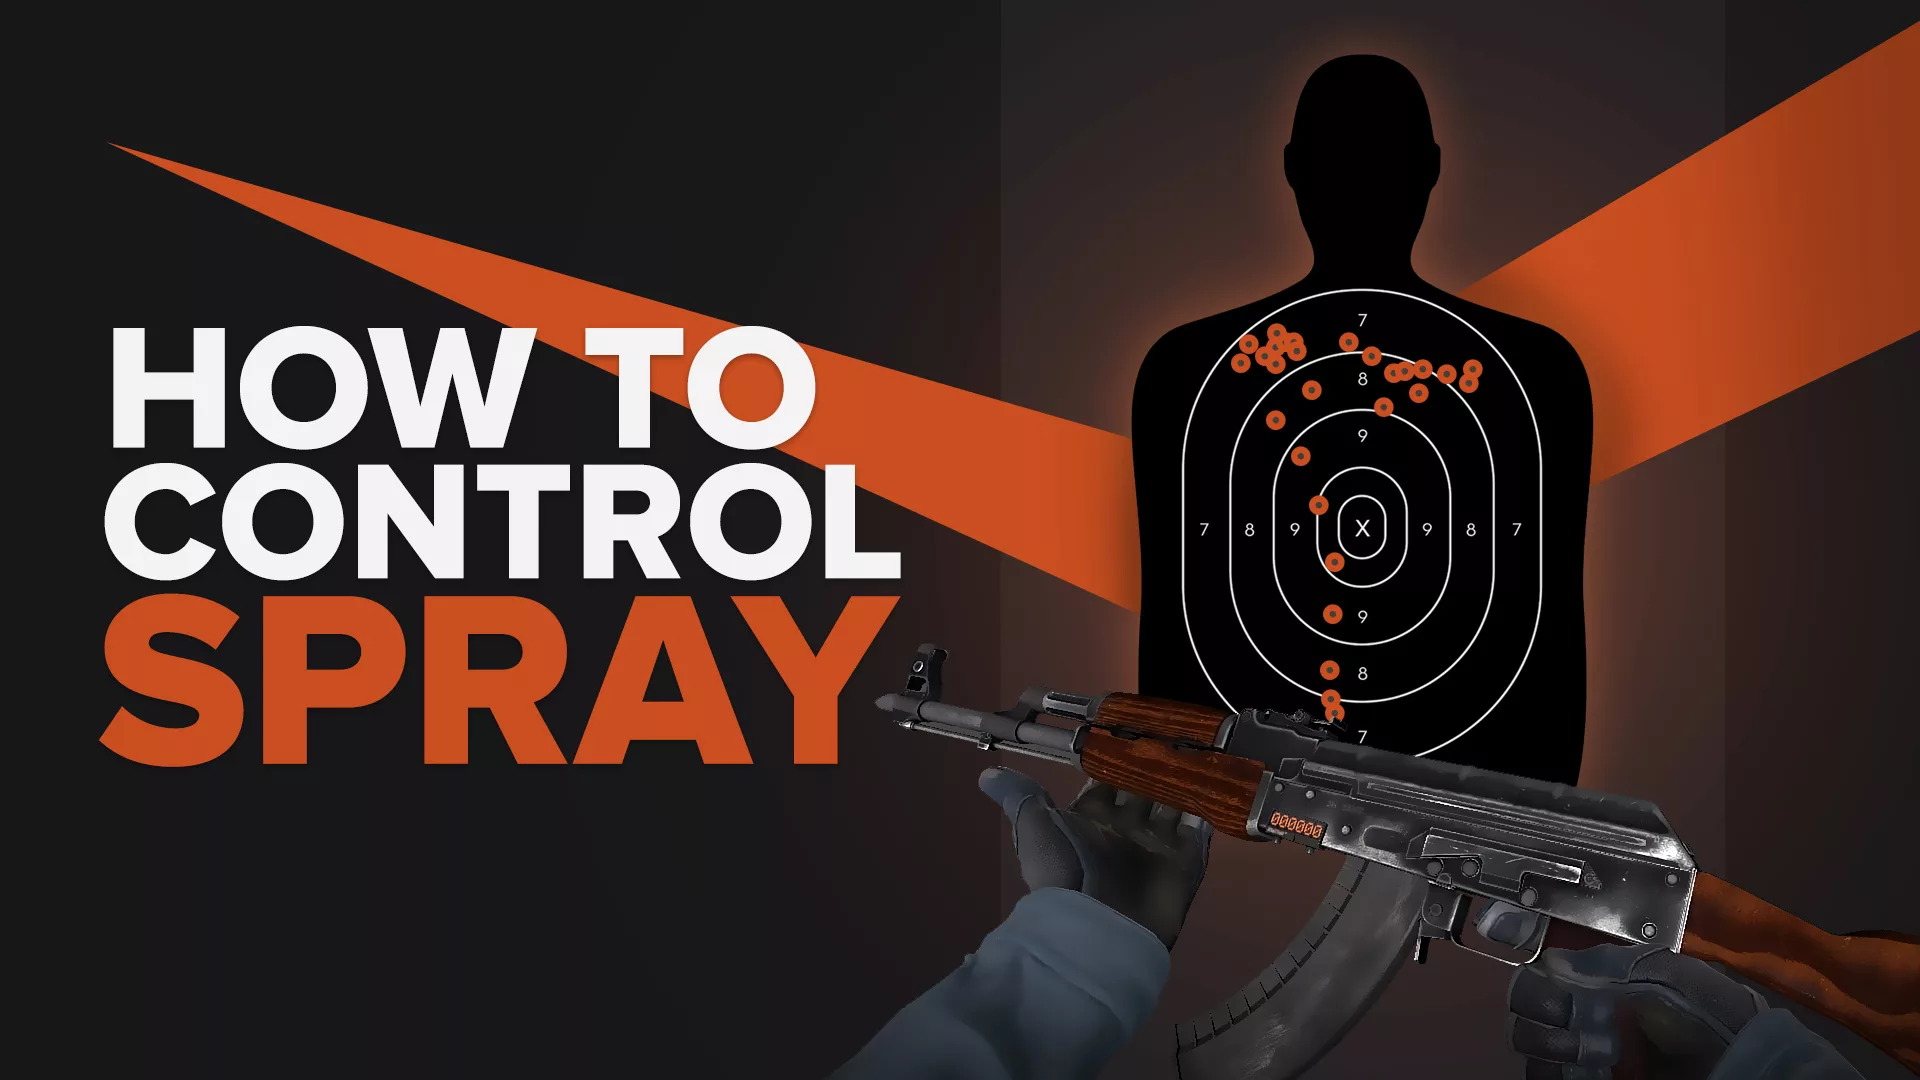 How To Control Spray in CSGO?